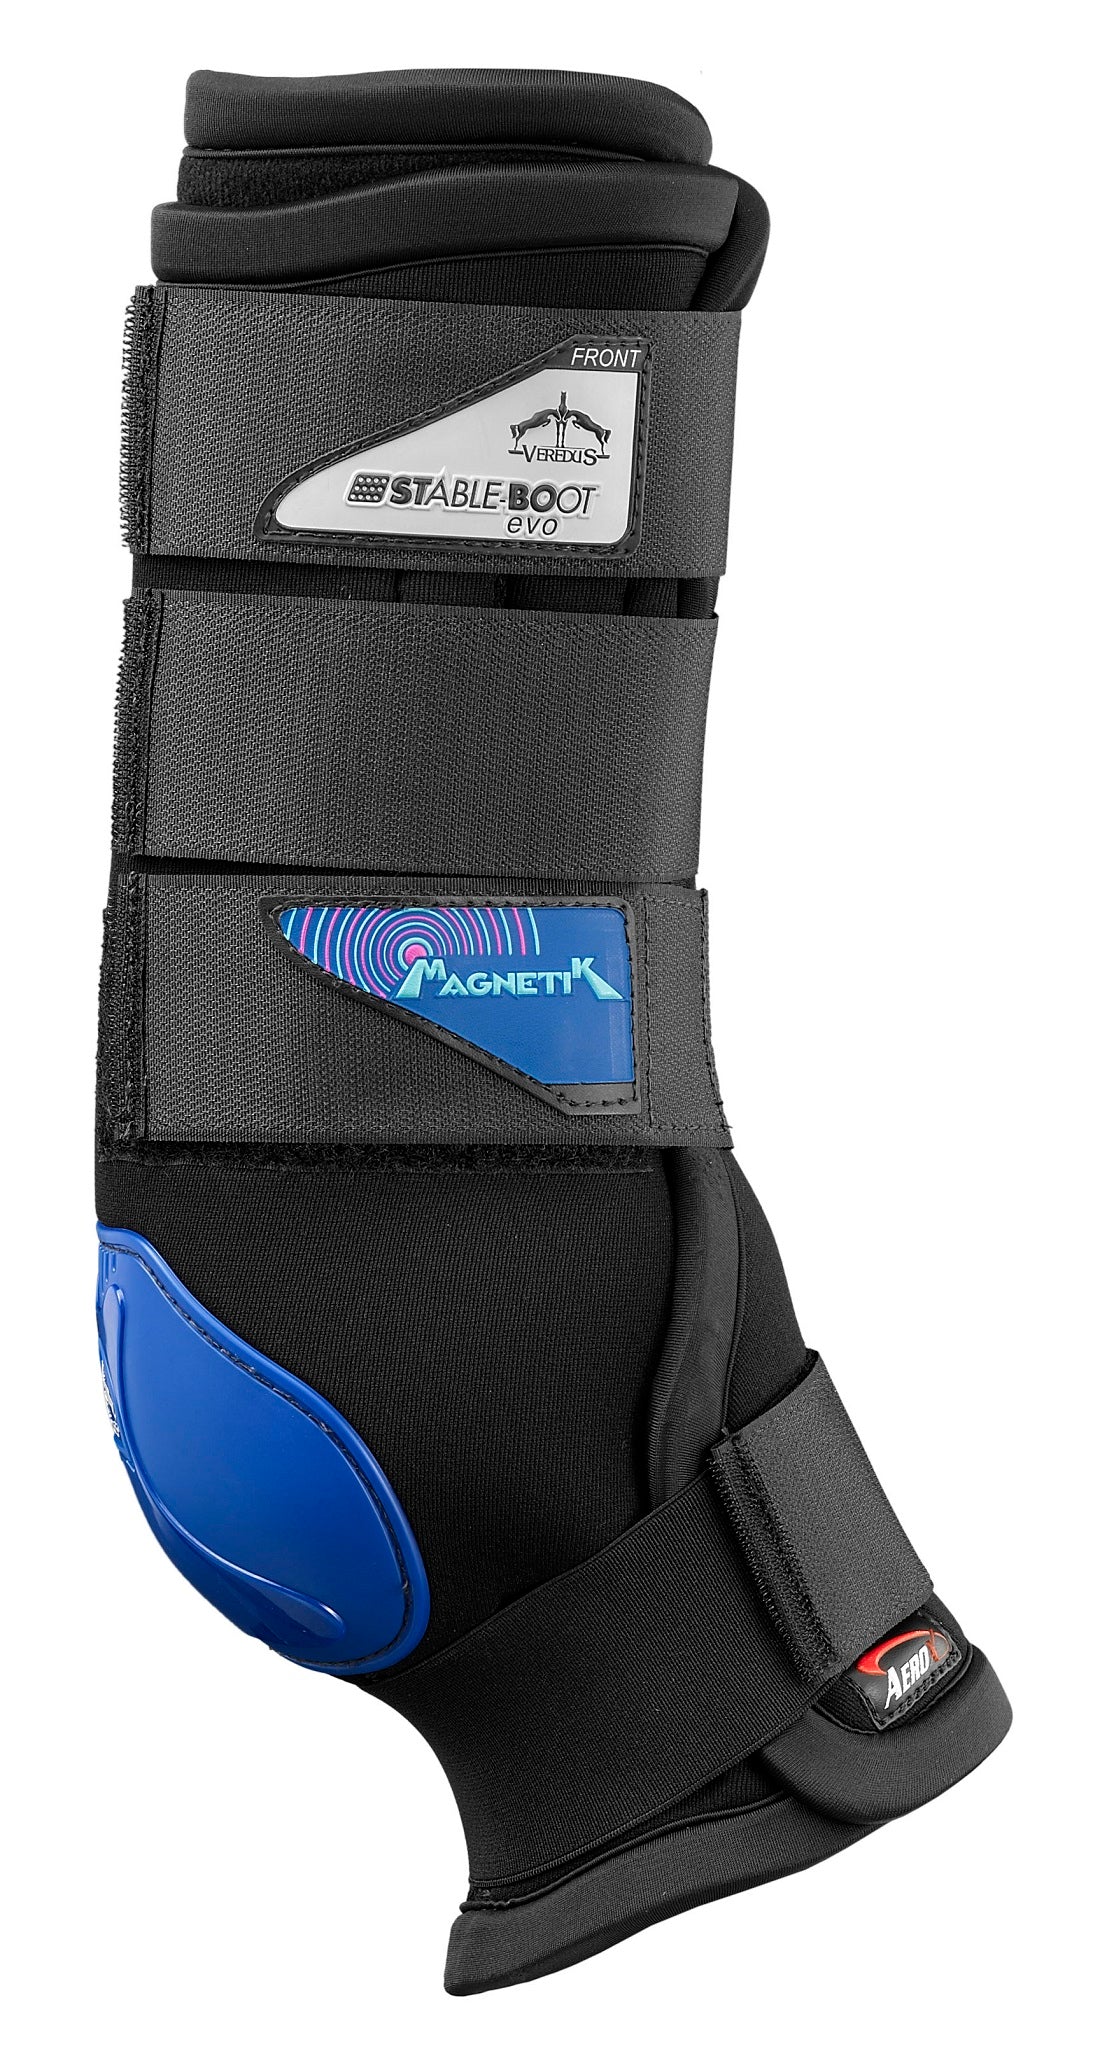 MAGNETIK STABLE BOOT Rear